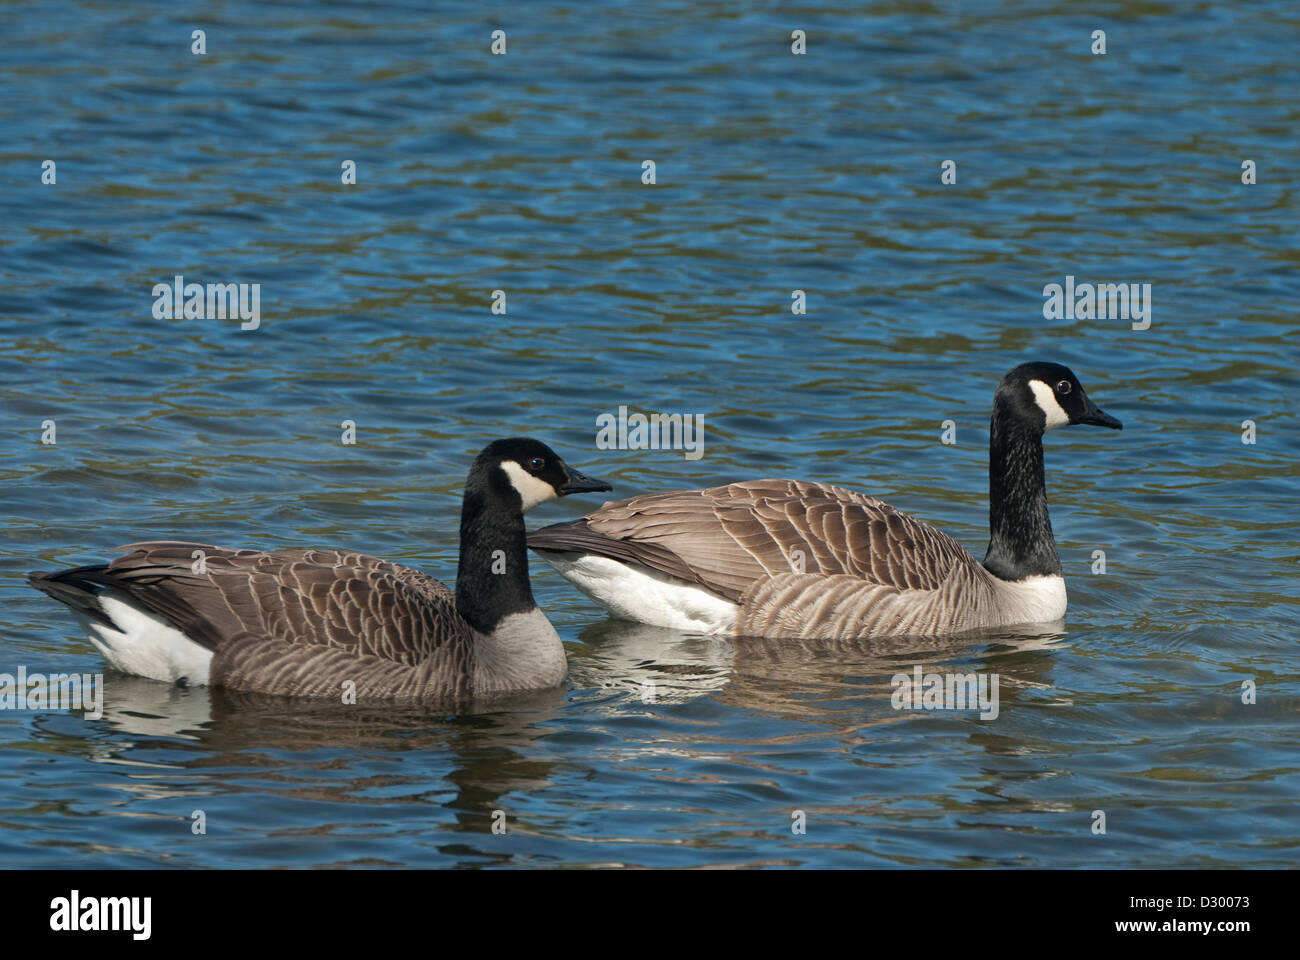 Pair of Canada Geese swimming on open water Stock Photo